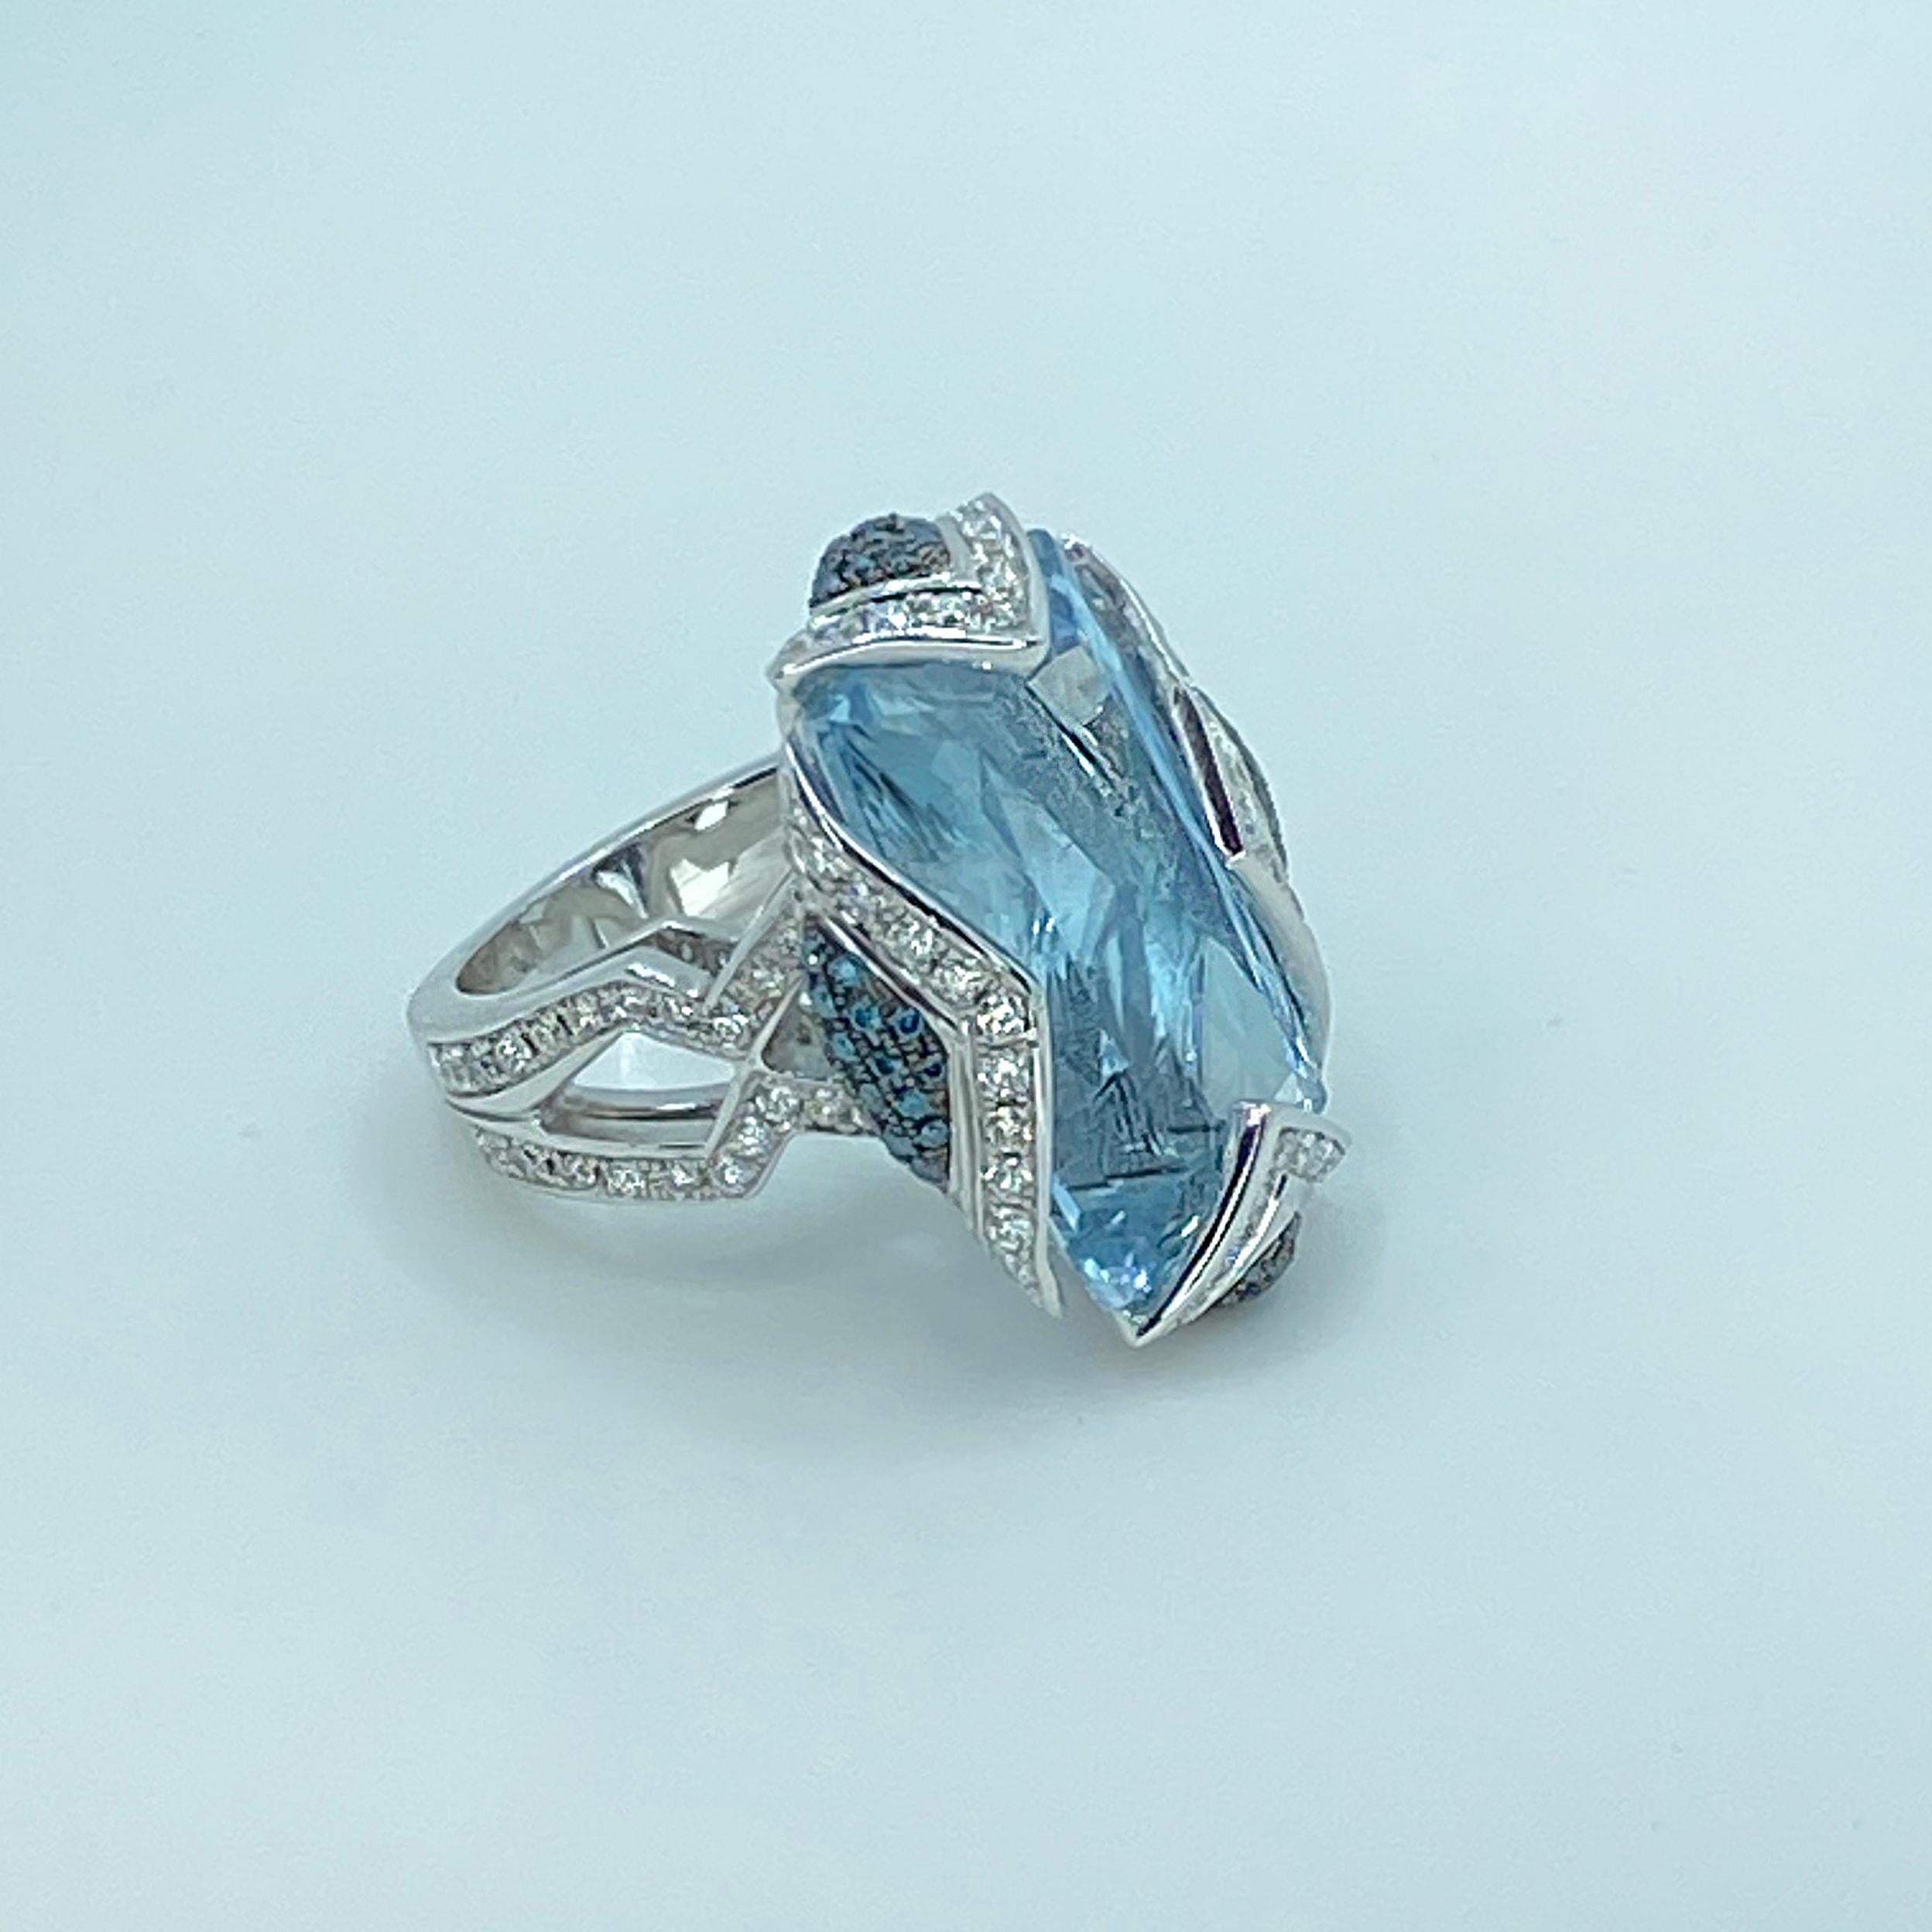 S.Georgios designer Ring is all hand-made in White Gold 18 Karat solitaire Aquamarine, Blue and White Diamonds. This stunning ring features a solitaire Cushion cut natural Aquamarine total weight of 28.25 Carat, surrounded by brilliant-cut white 